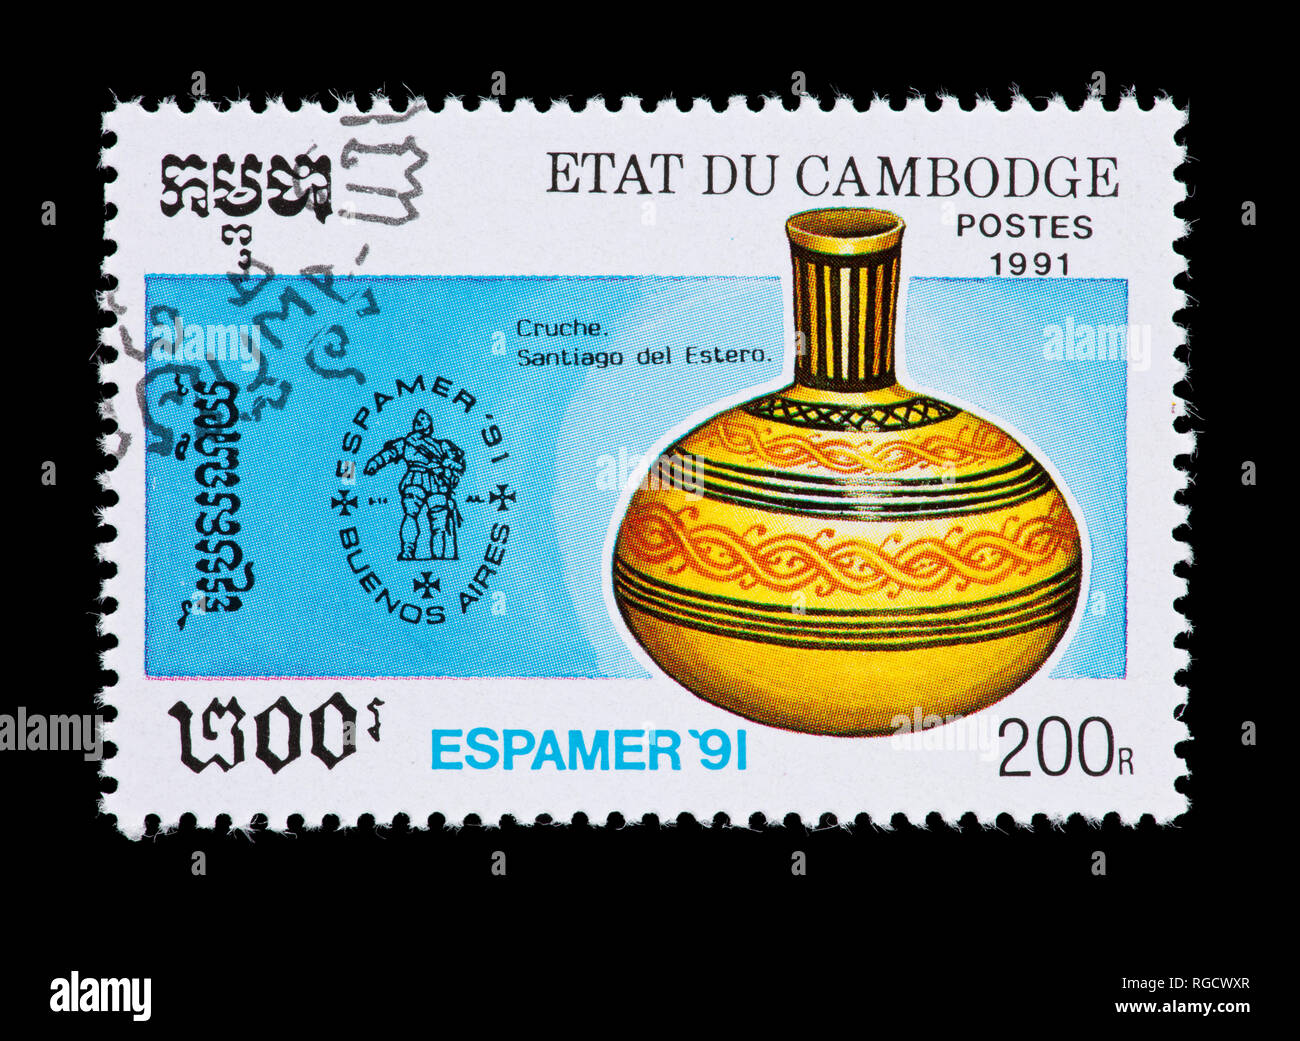 Postage stamp from Cambodia depicting a pre-Columbian example of Santiago del Estero pottery Stock Photo